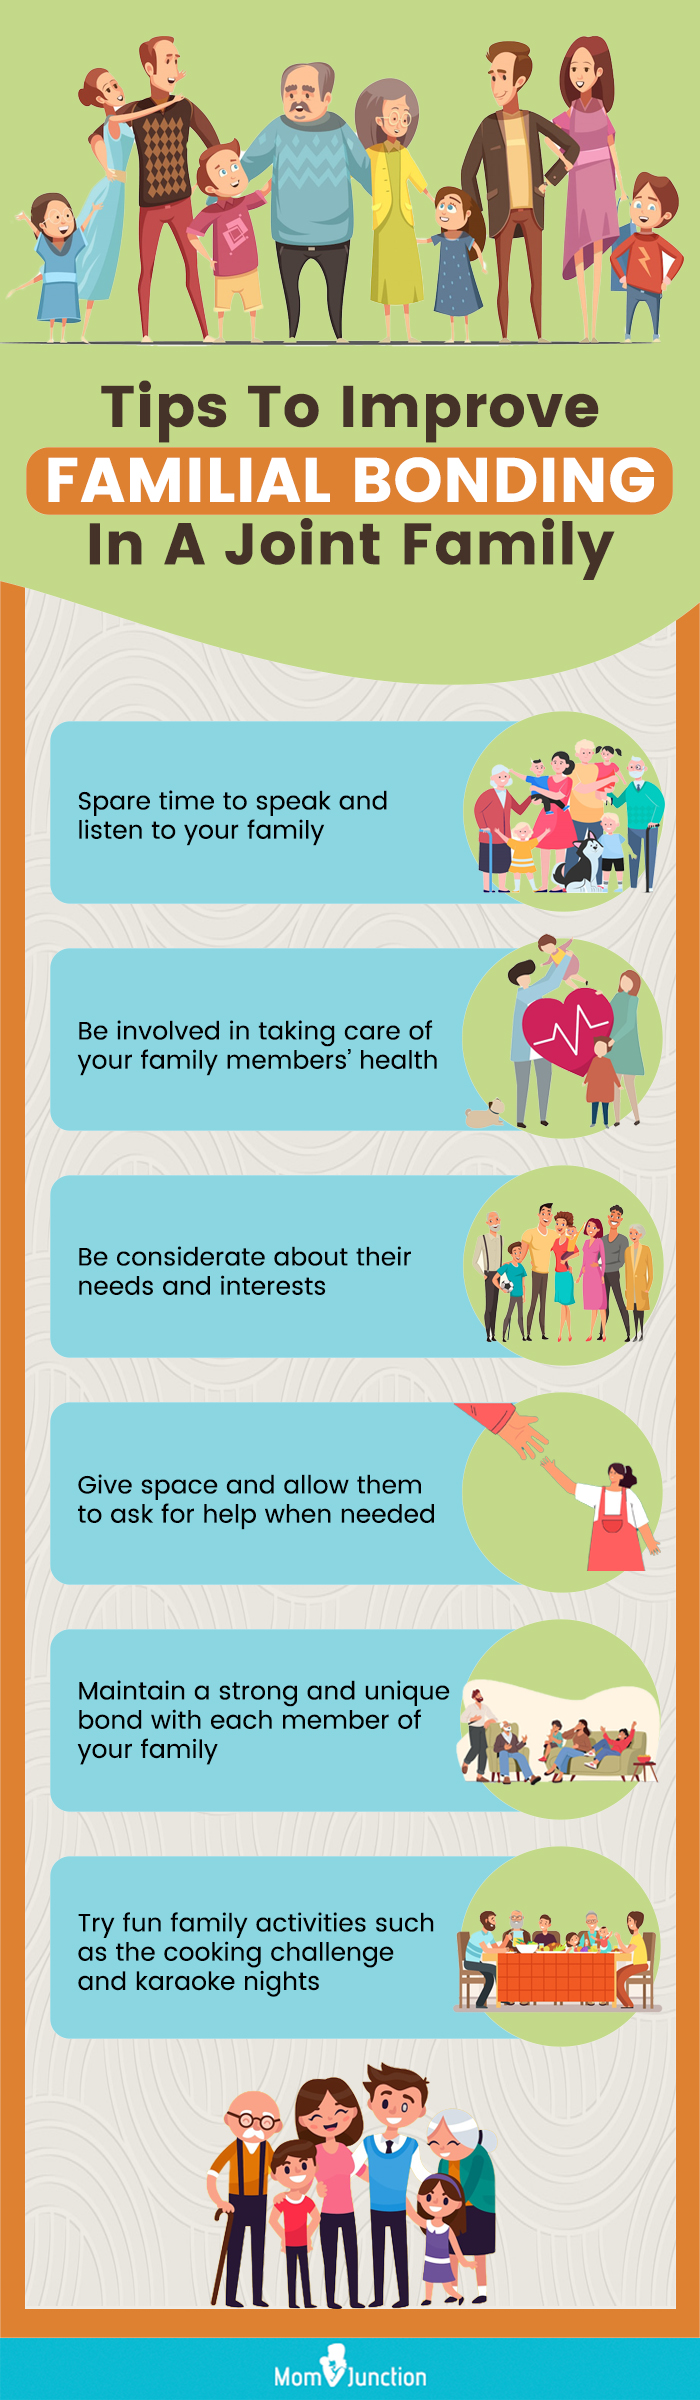 tips to improve familial bonding in a joint family (infographic)